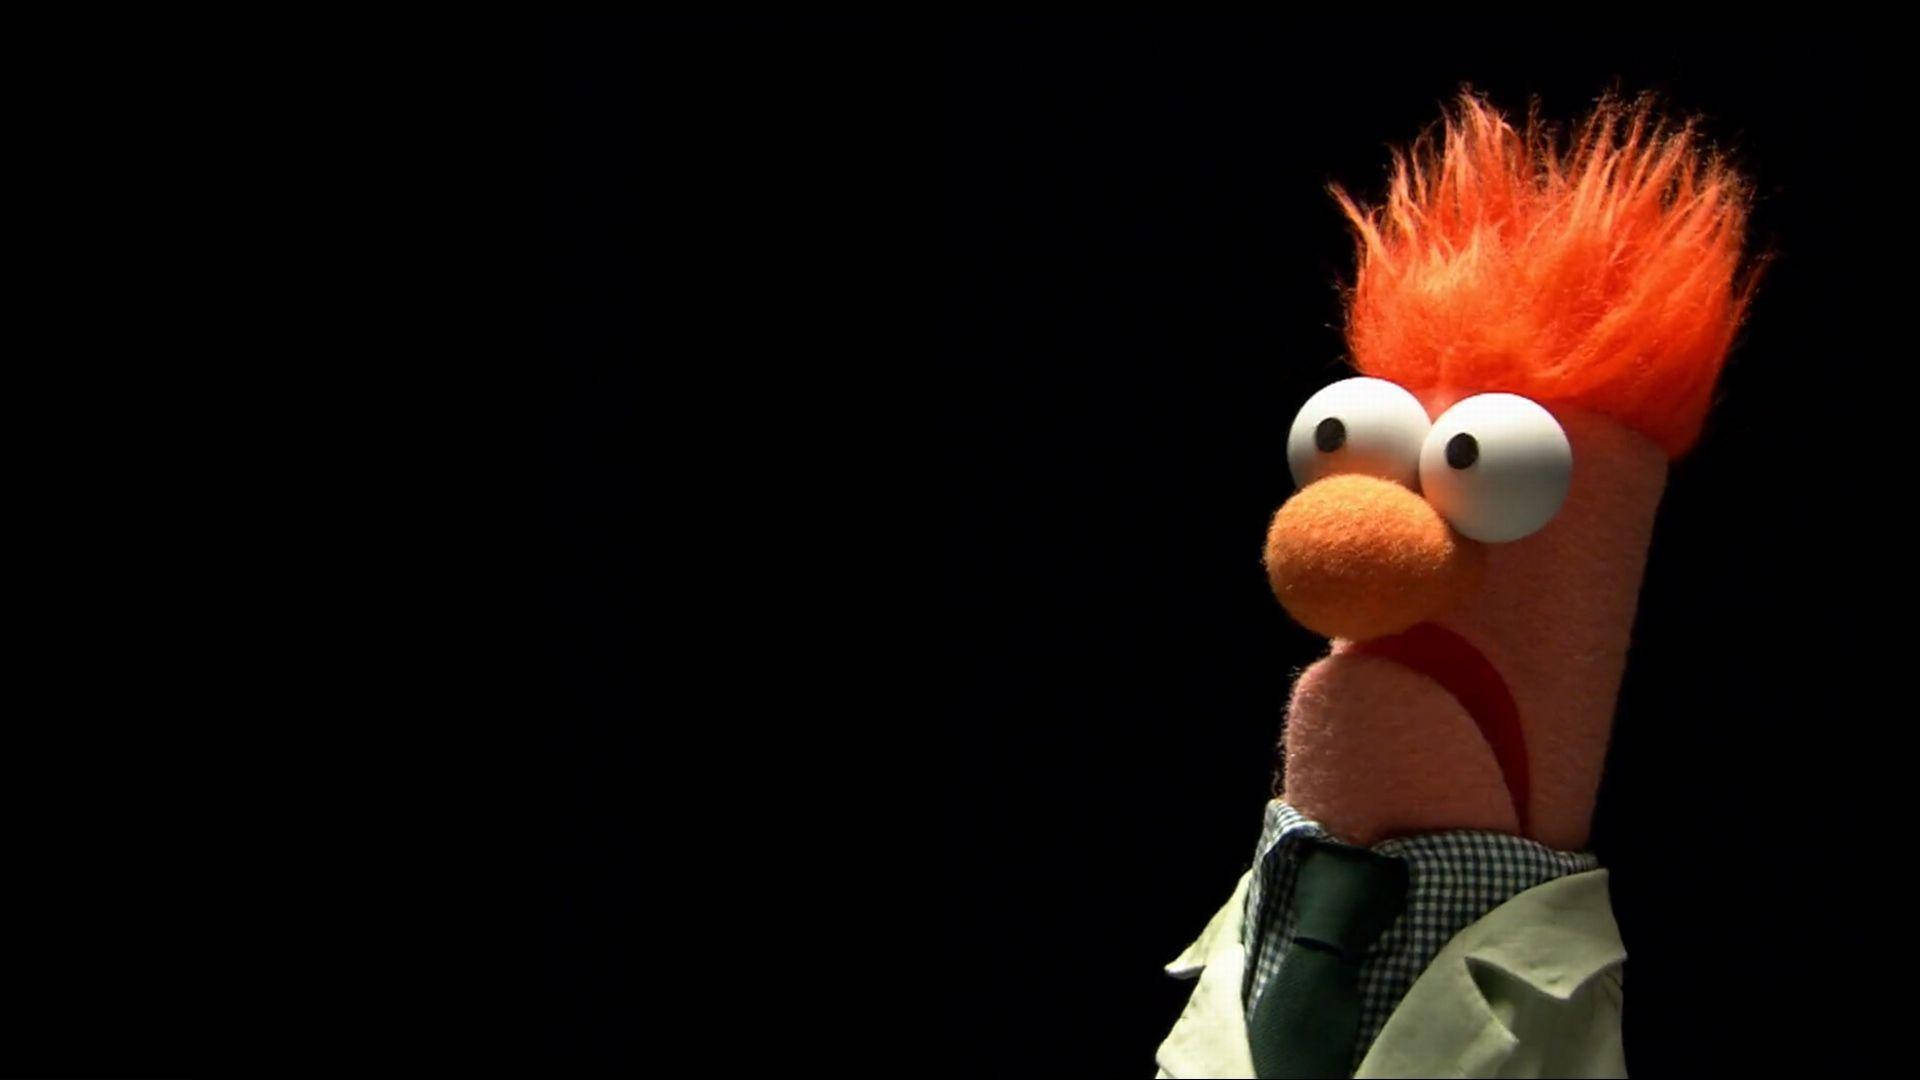 "Laughter is a beaker full of happiness!" Wallpaper